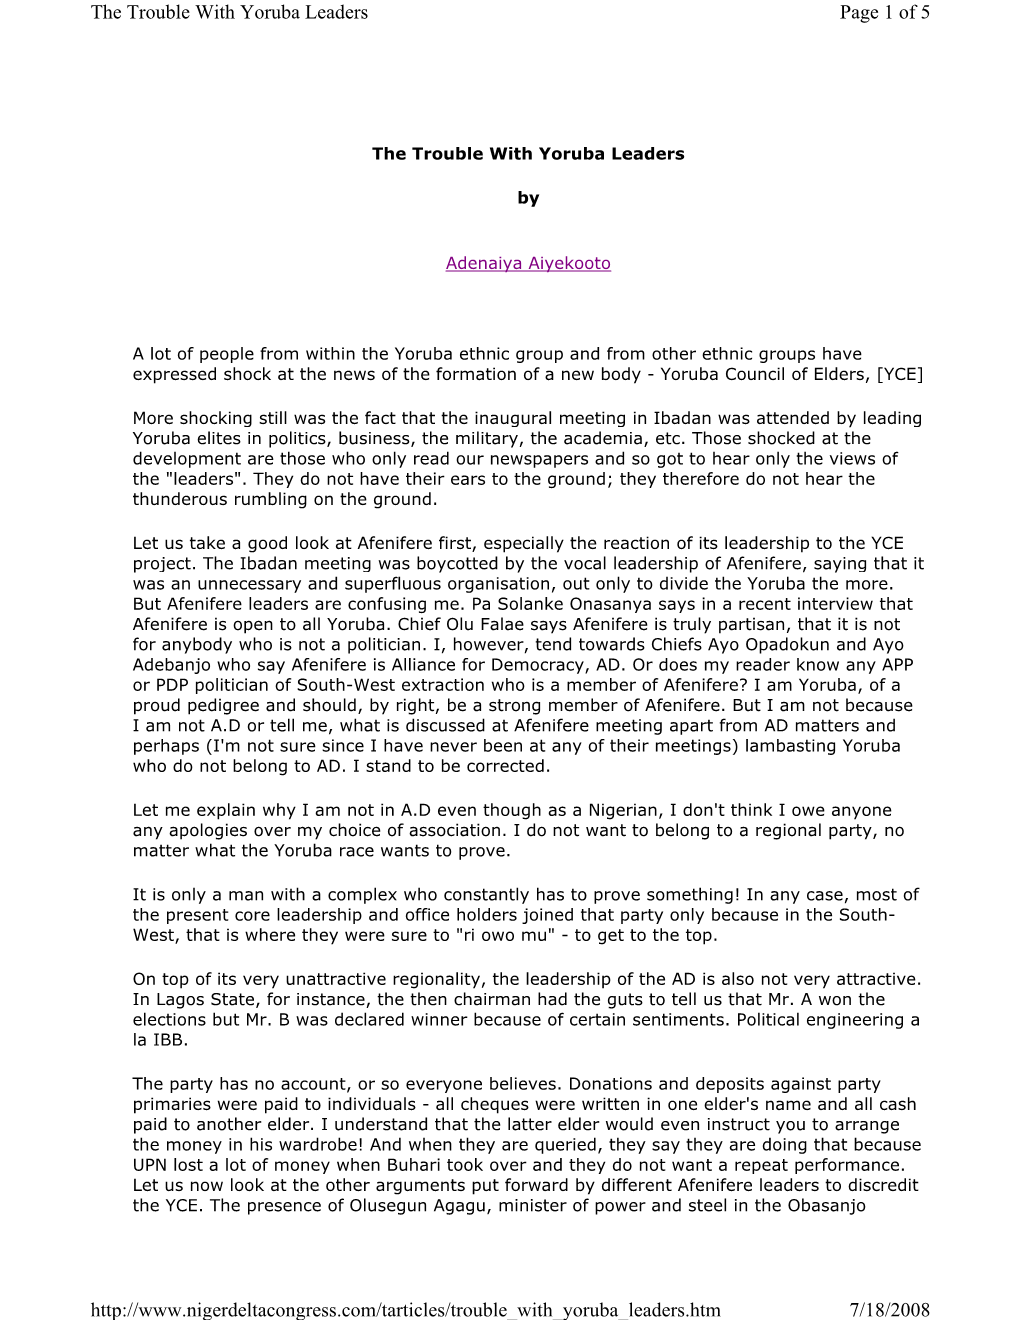 The Trouble with Yoruba Leaders Page 1 of 5